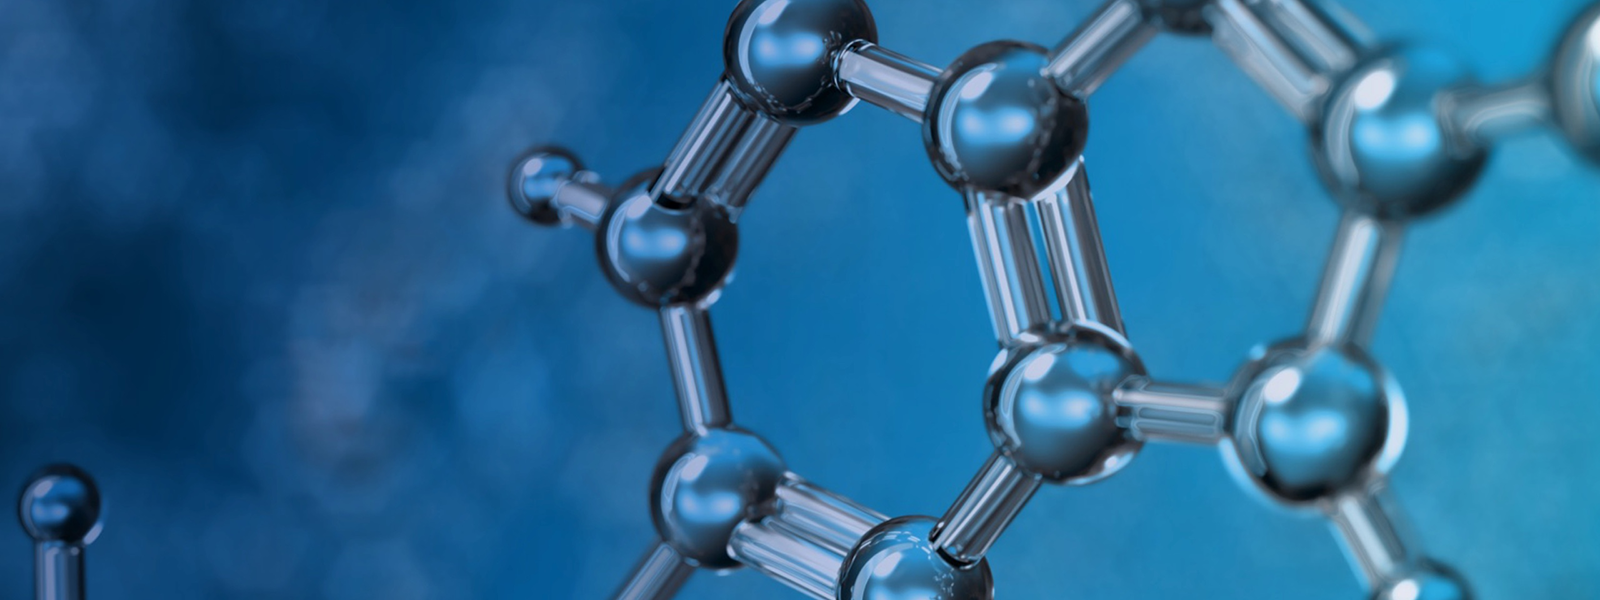 covalent bonded molecules, close up on blue background